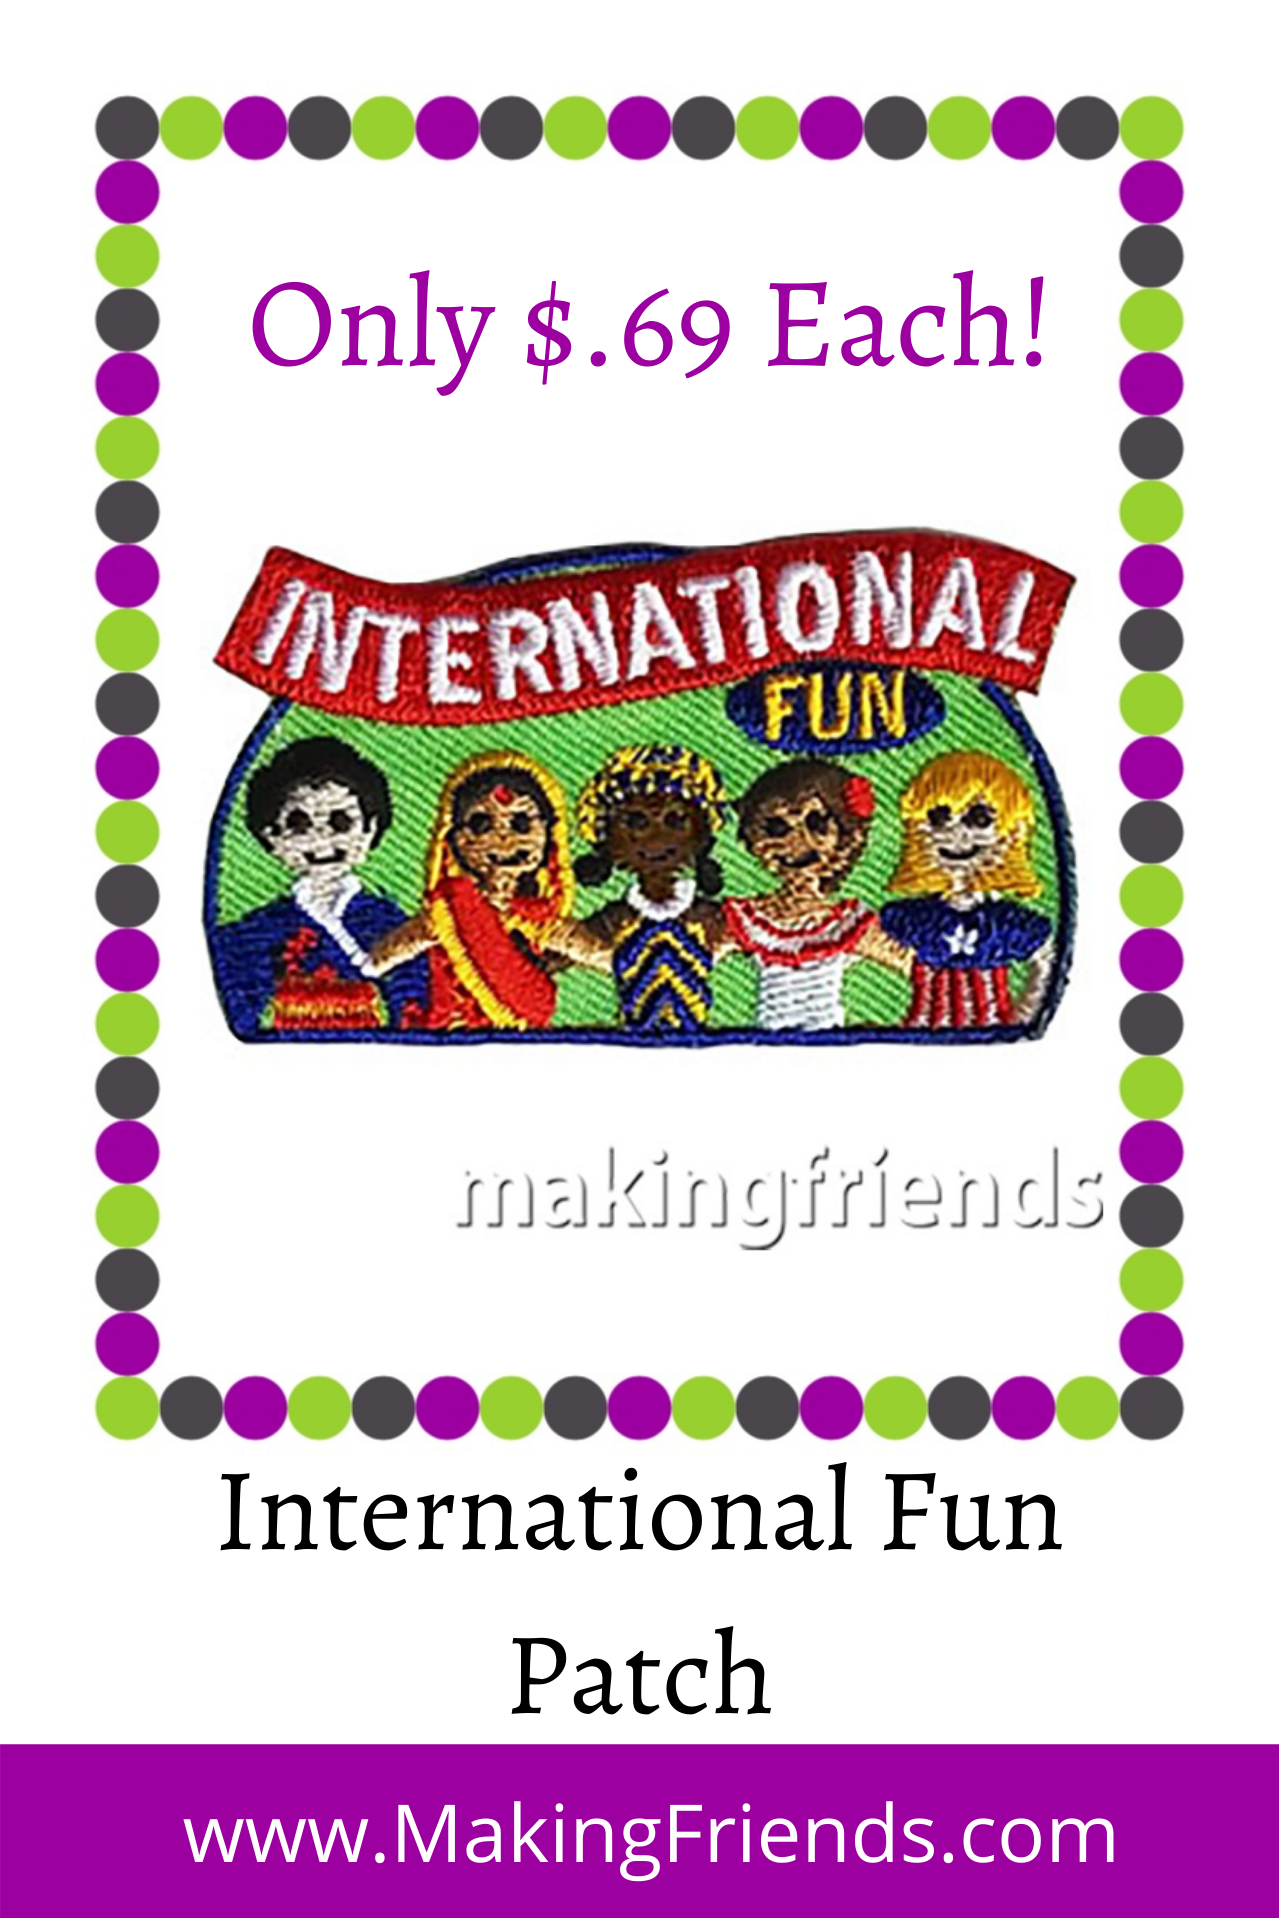 Having an event to learn about other countries? This patch is just what you are looking for! $.69 each with free shipping available! #makingfriends #funpatch #badges #girlscoutpatches #boyscoutpatches #patches #international #freeshippingavailable via @gsleader411